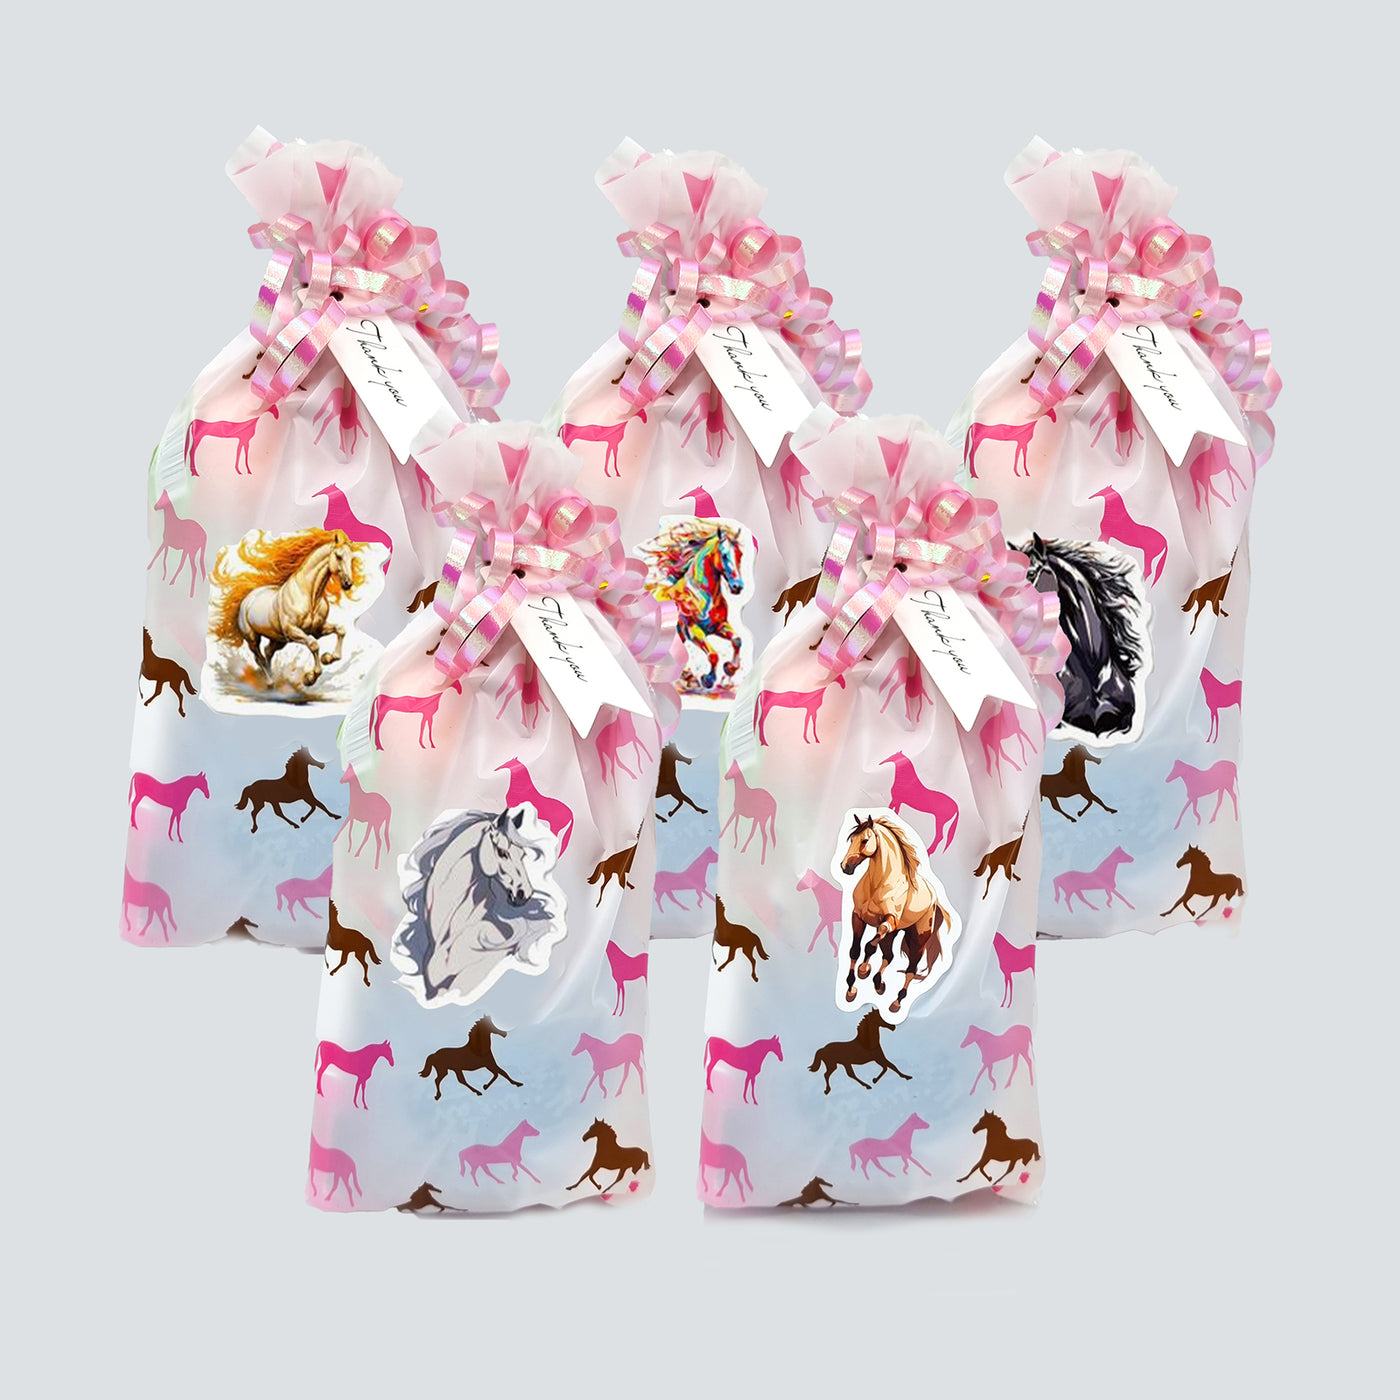 Pre Filled Birthday Horse Pony Birthday Party Goody Bags With Toys And Vegan Sweets.